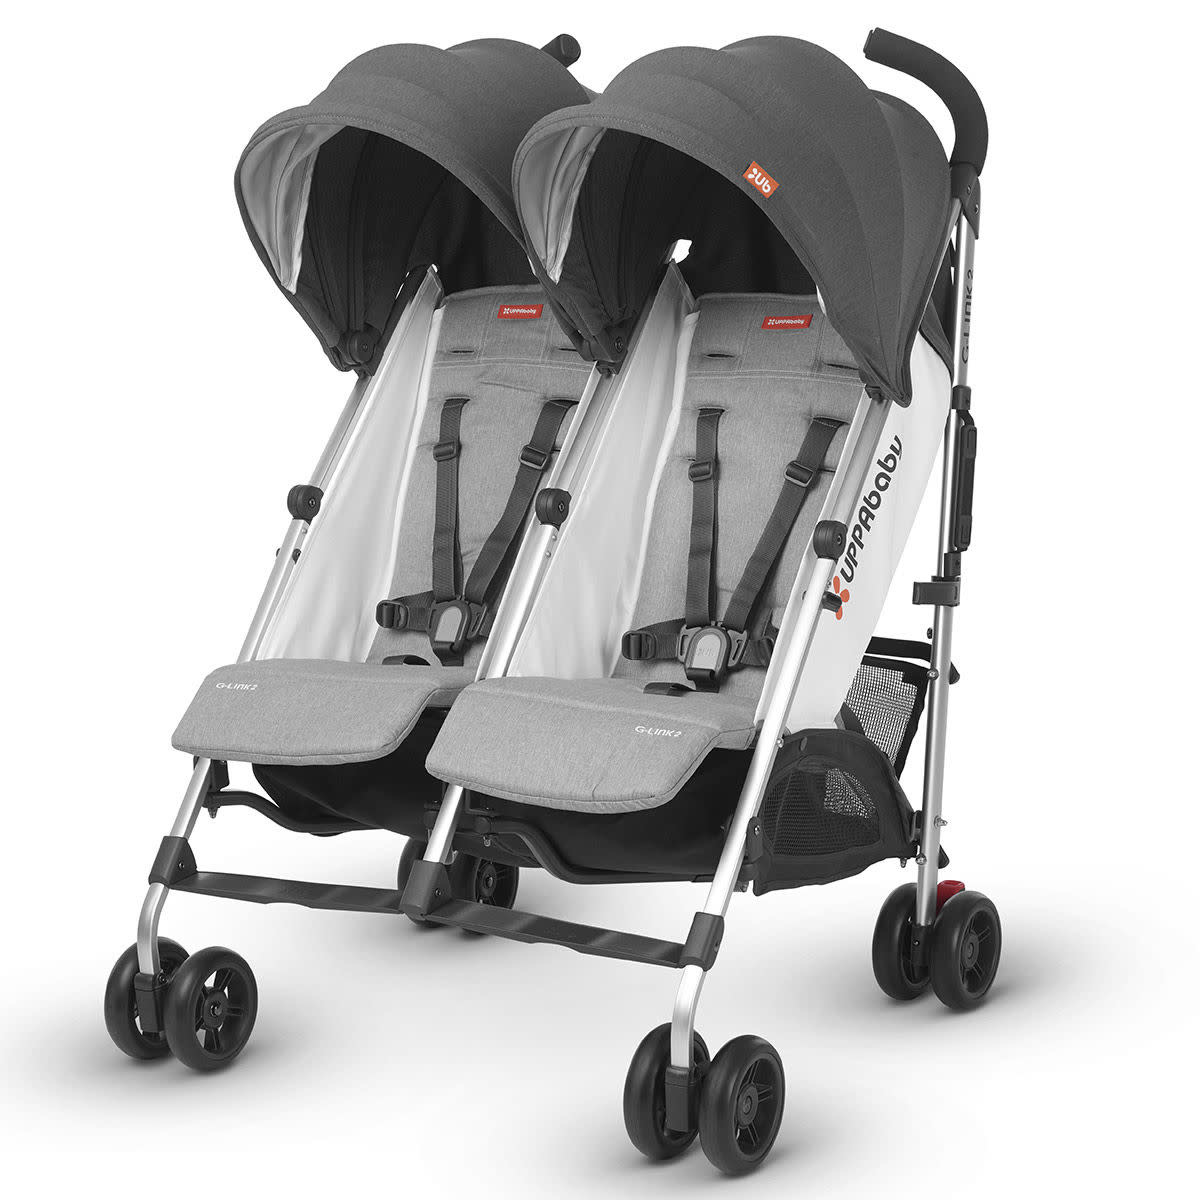 UPPAbaby UPPAbaby - Porte-Gobelet pour Poussette G-Link et G-Luxe -  Charlotte et Charlie